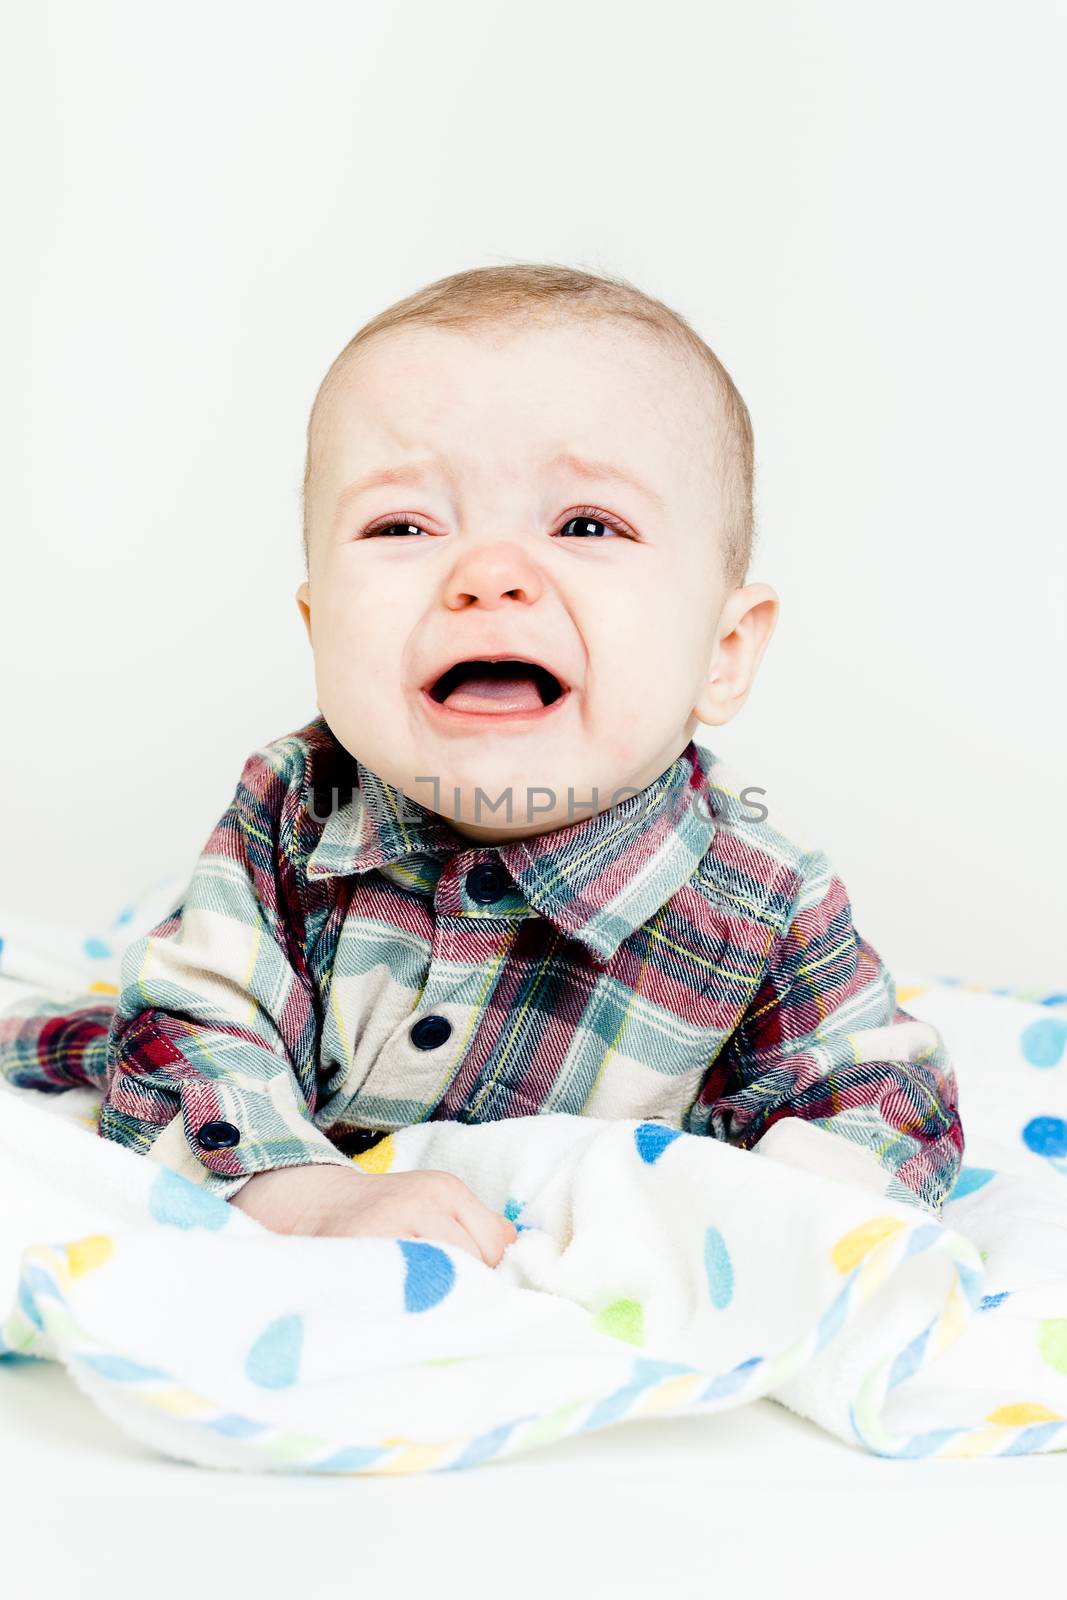 Adorable baby screaming in a plaid shirt by pzRomashka